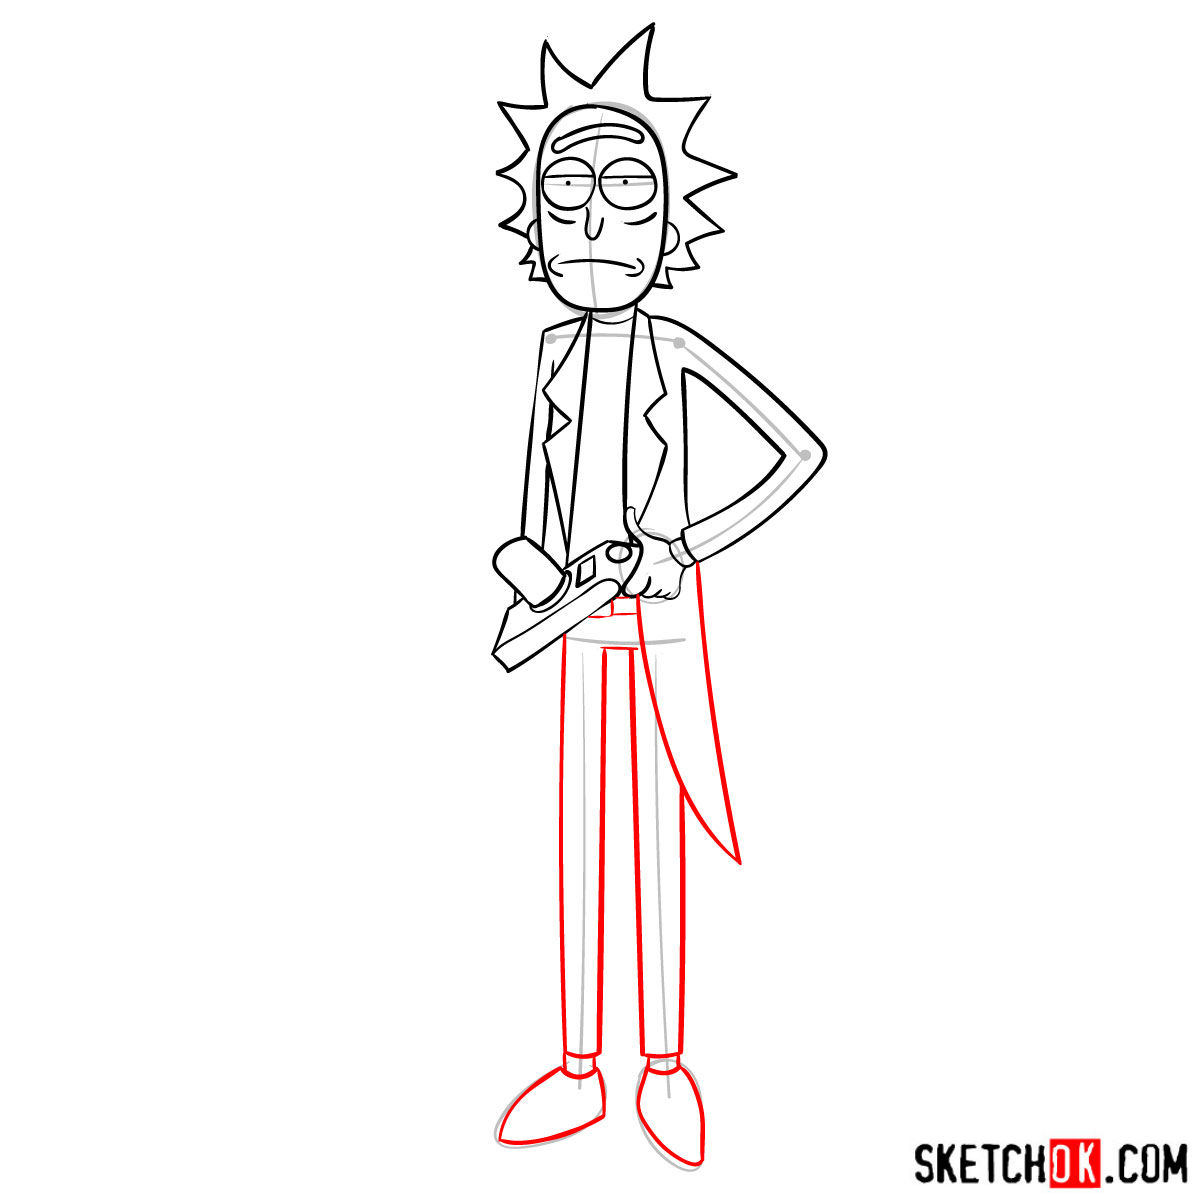 How to draw rick sanchez and his grandson morty the main characters from ri...